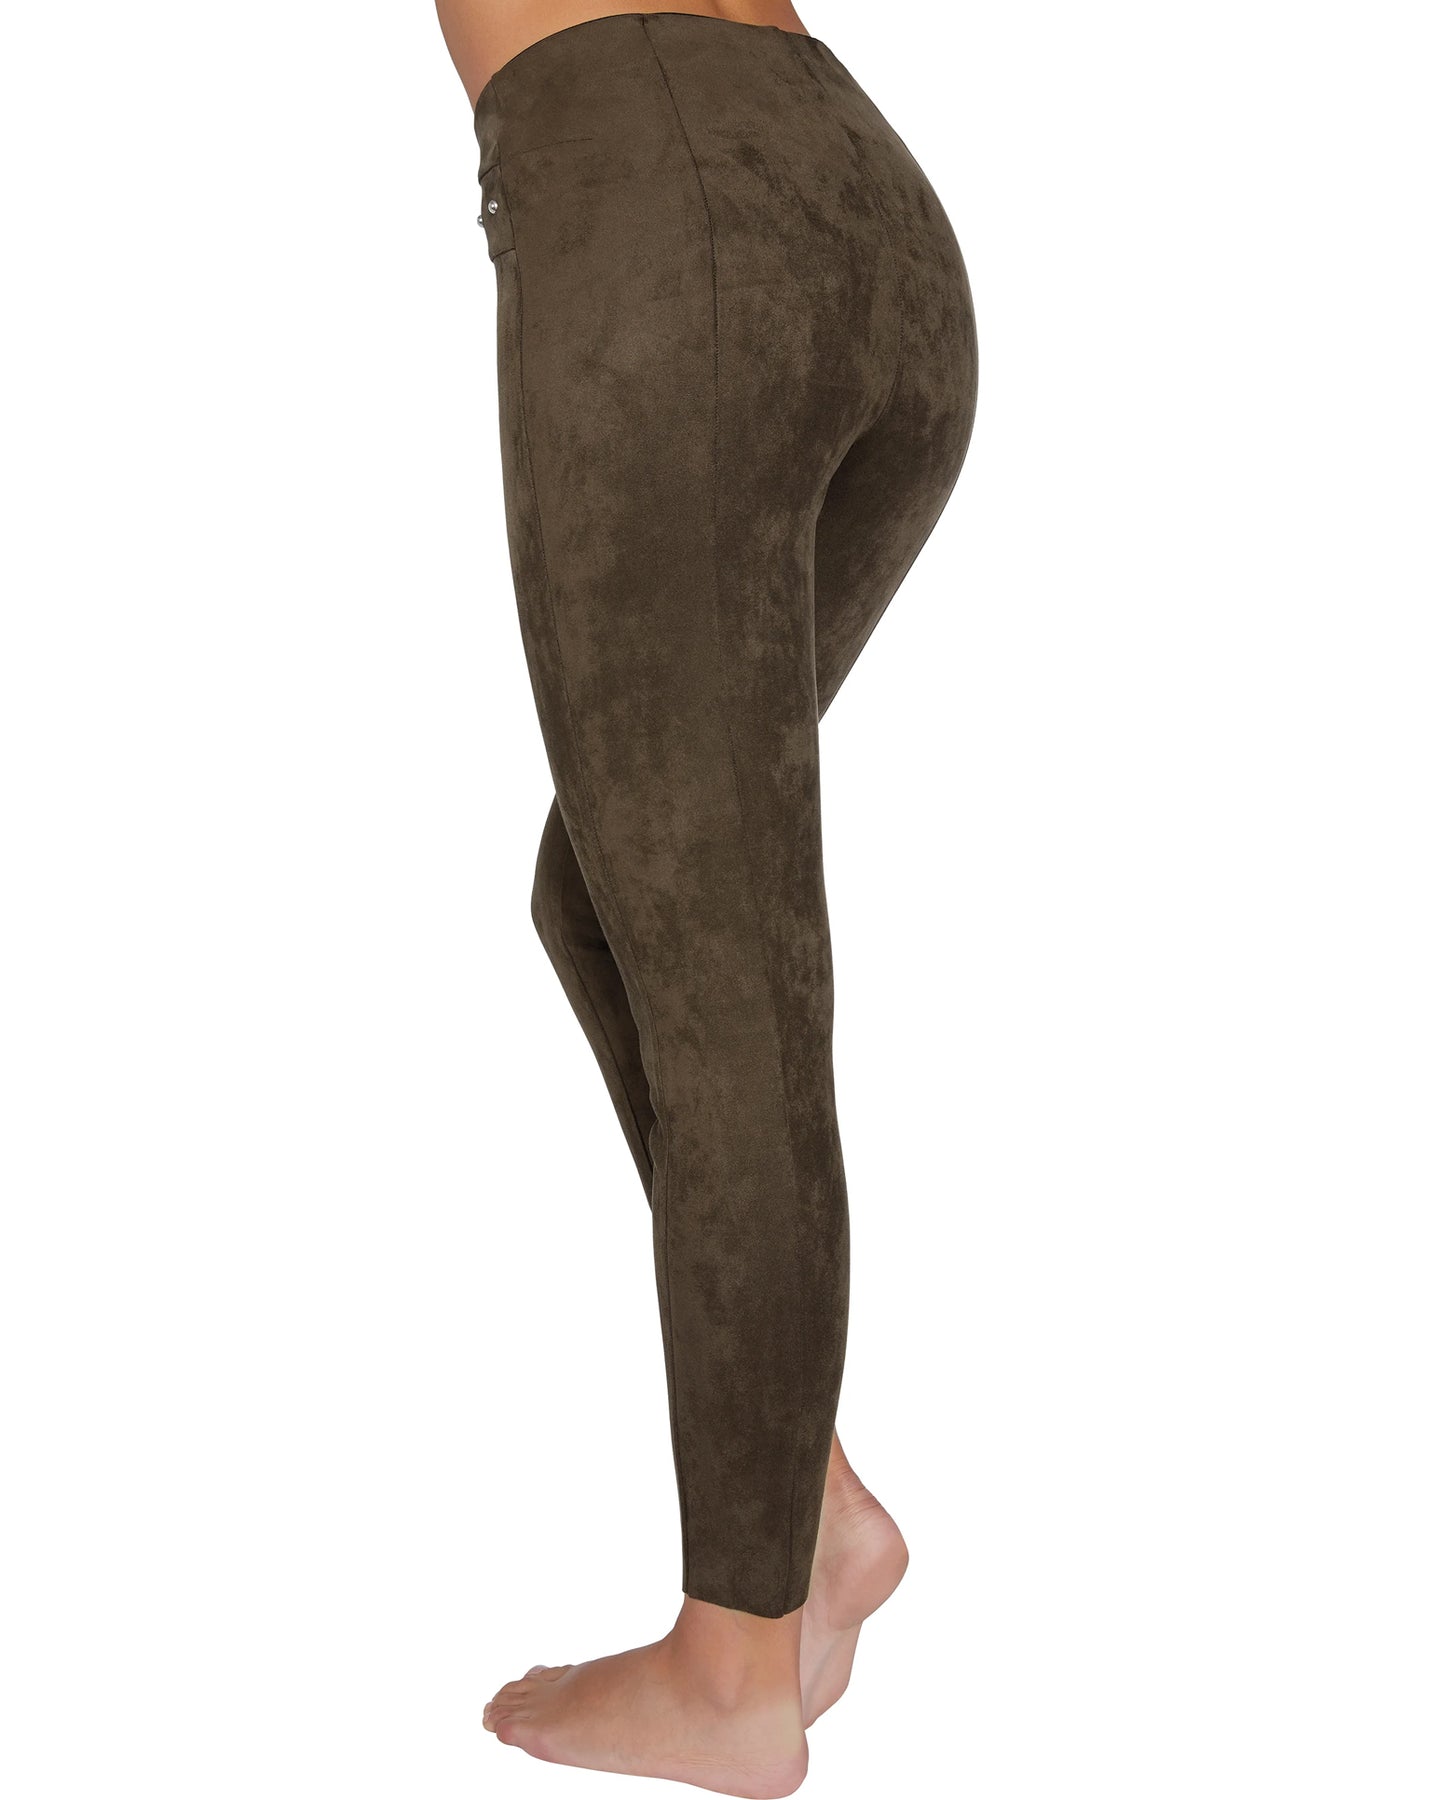 Ysabel Mora 70258 Suede Effect Treggings - brown high waist trouser leggings in faux suede with silver studs, back view.